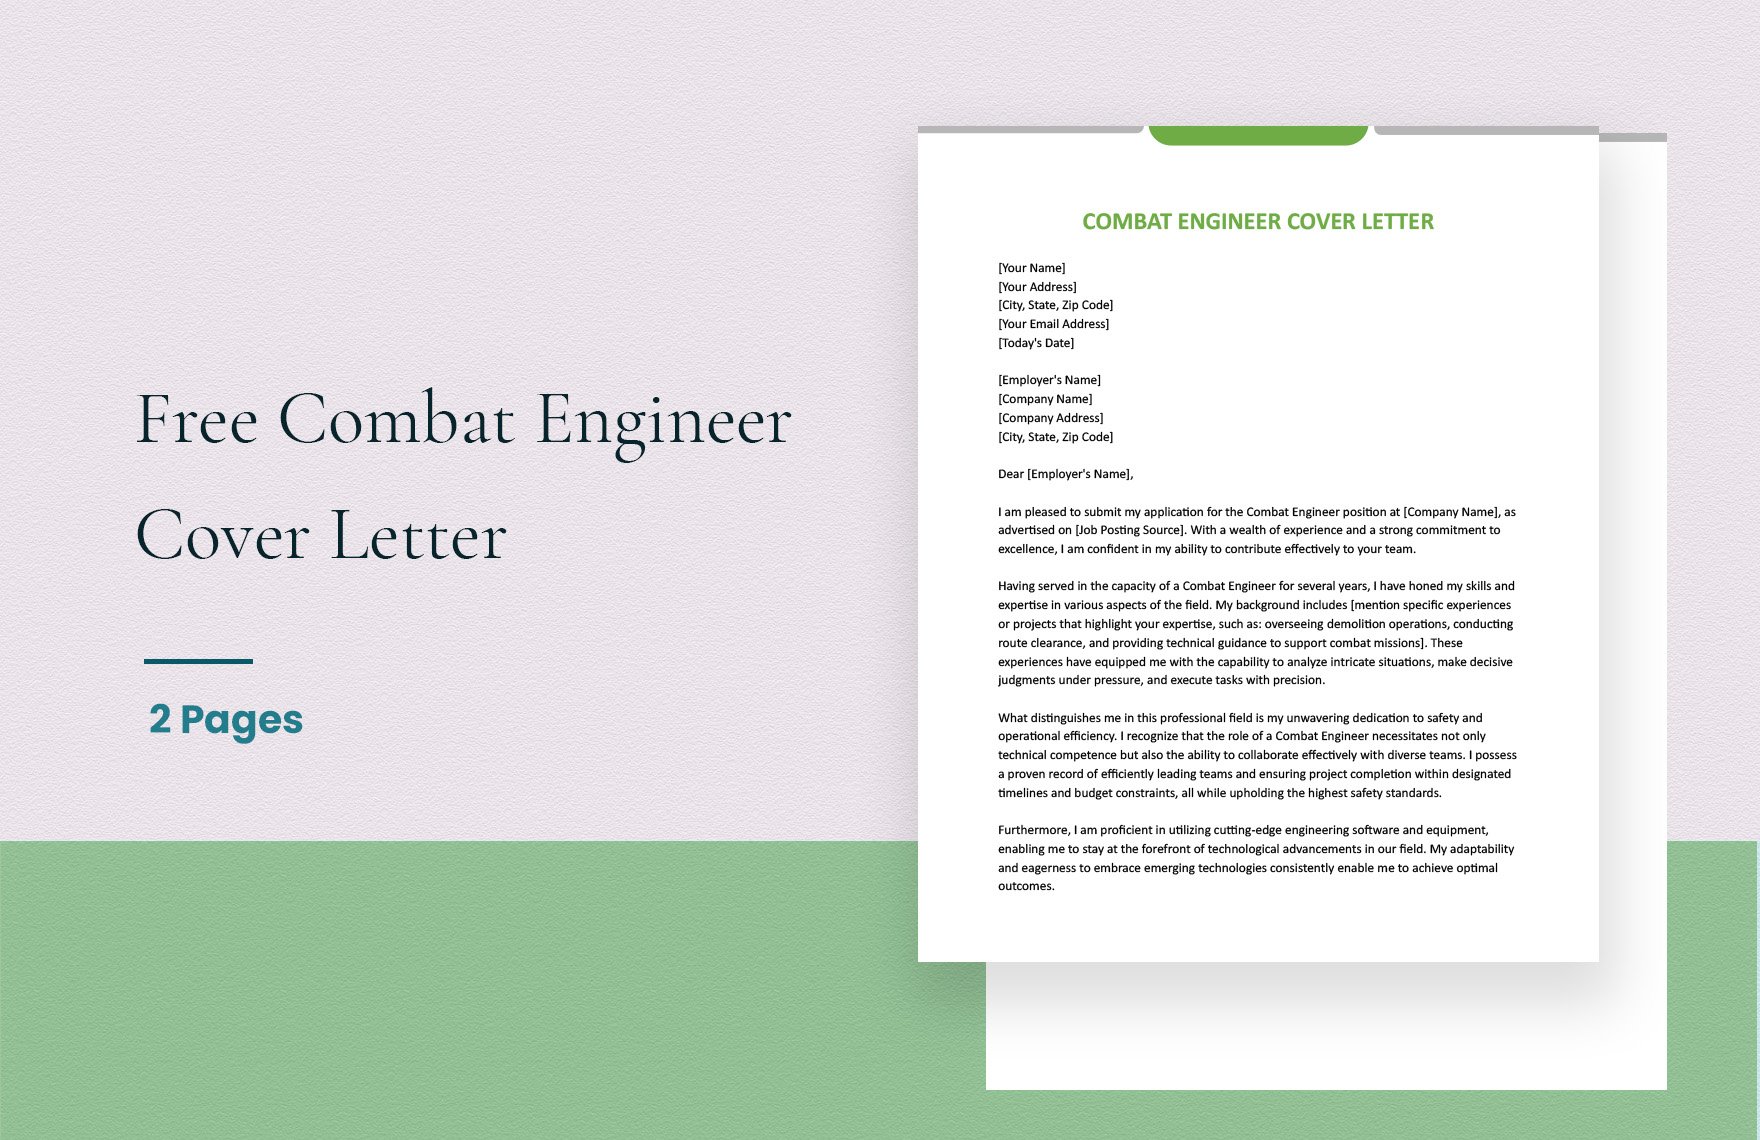 Combat Engineer Cover Letter